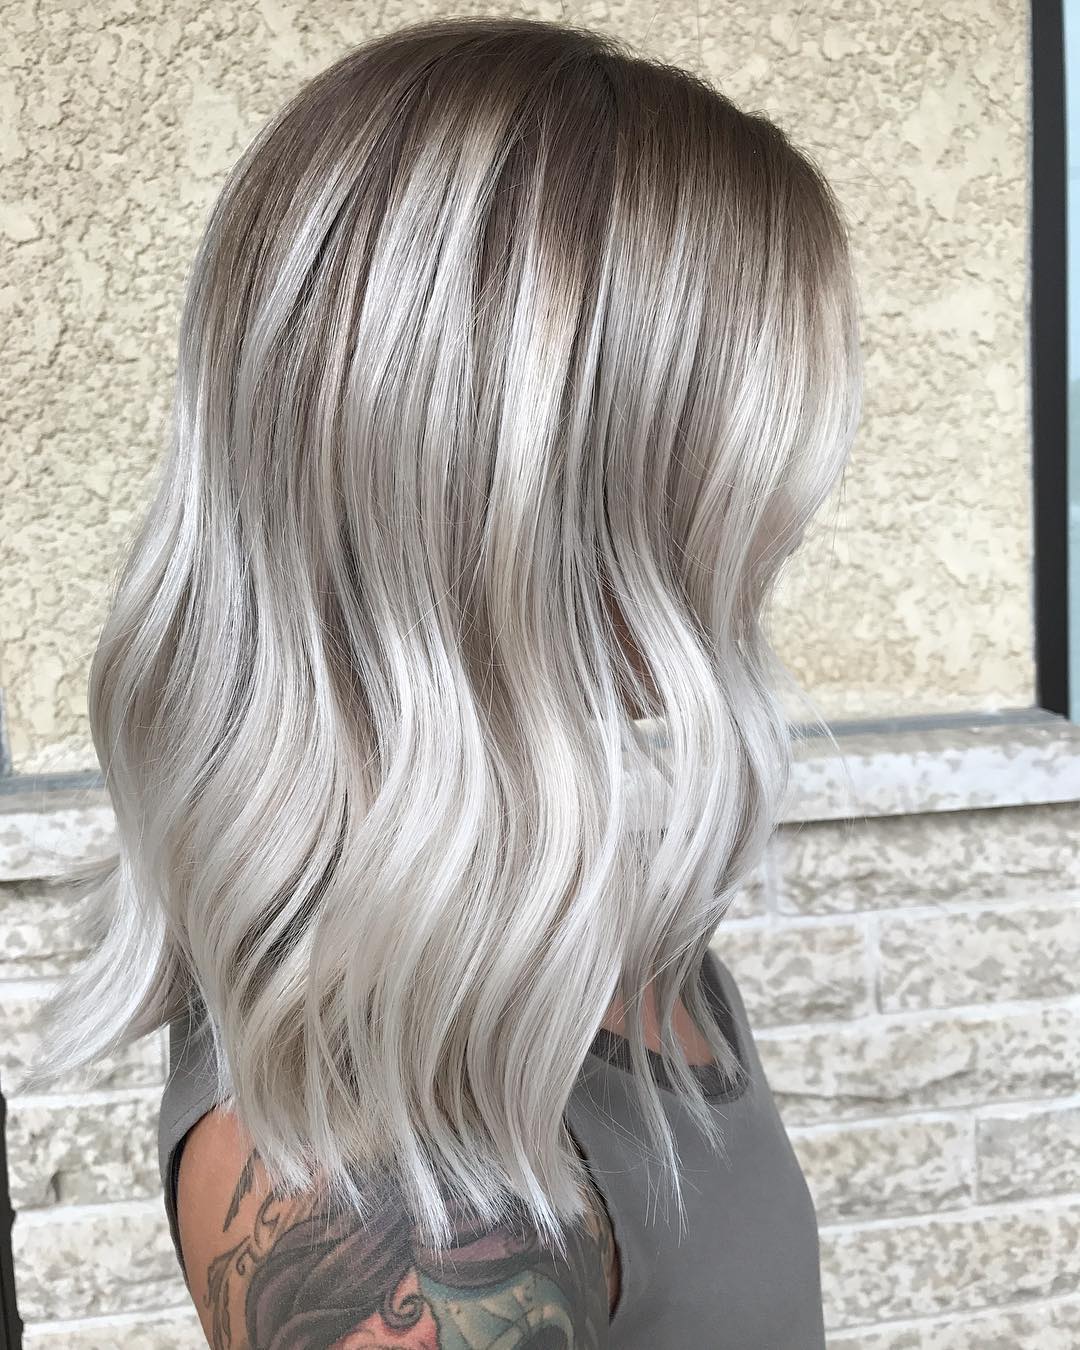 Ash Blonde Hairstyles - Women Hair Color Designs for 2018